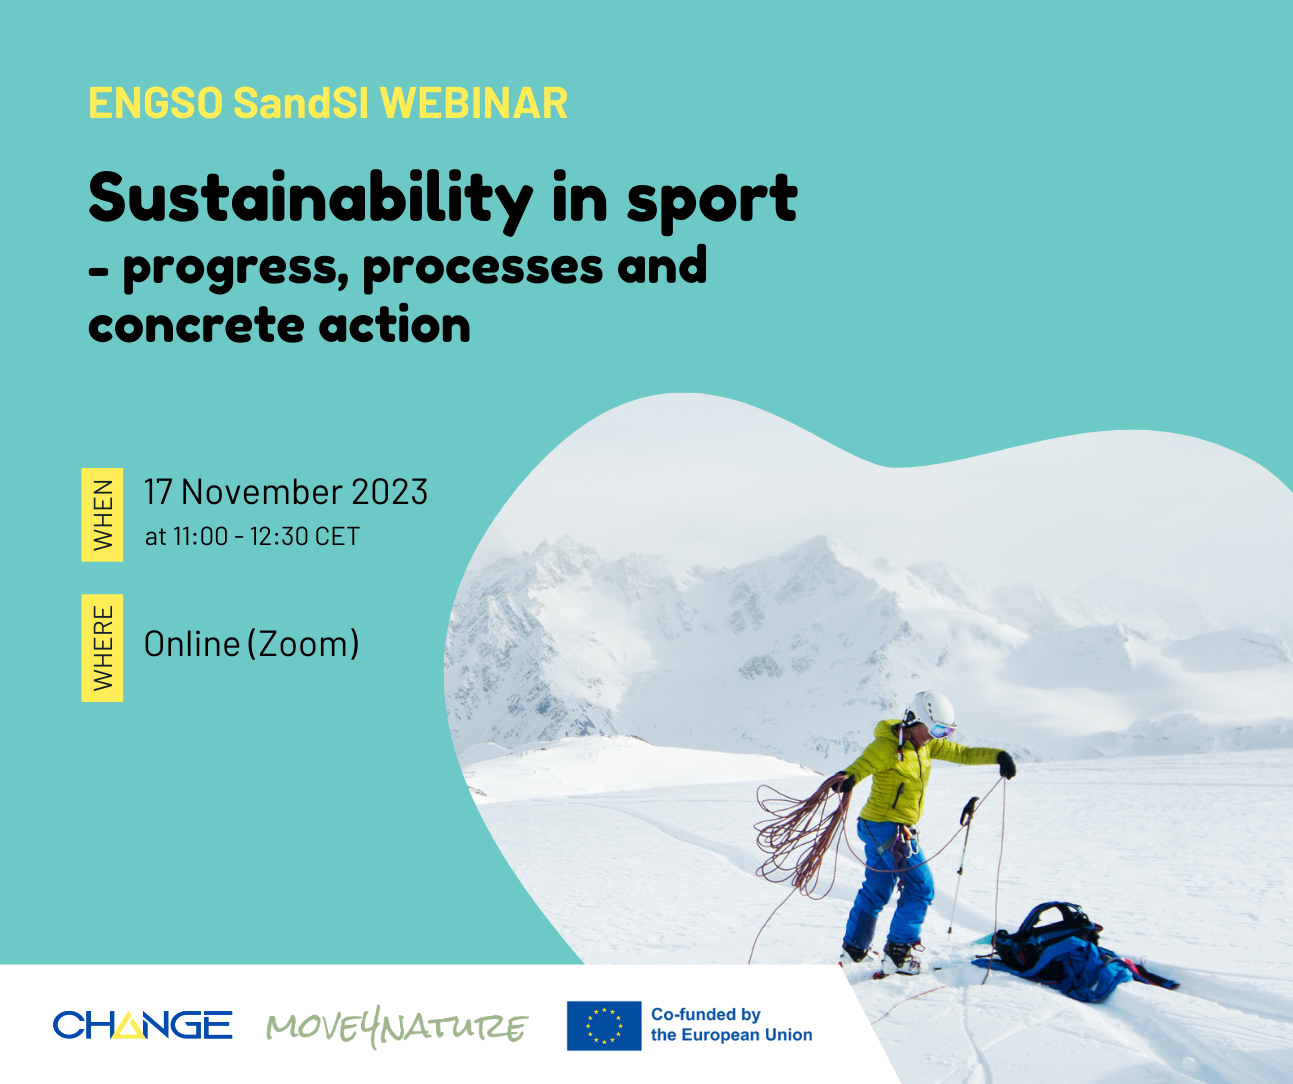 Sustainability in sport - progress, processes and concrete action